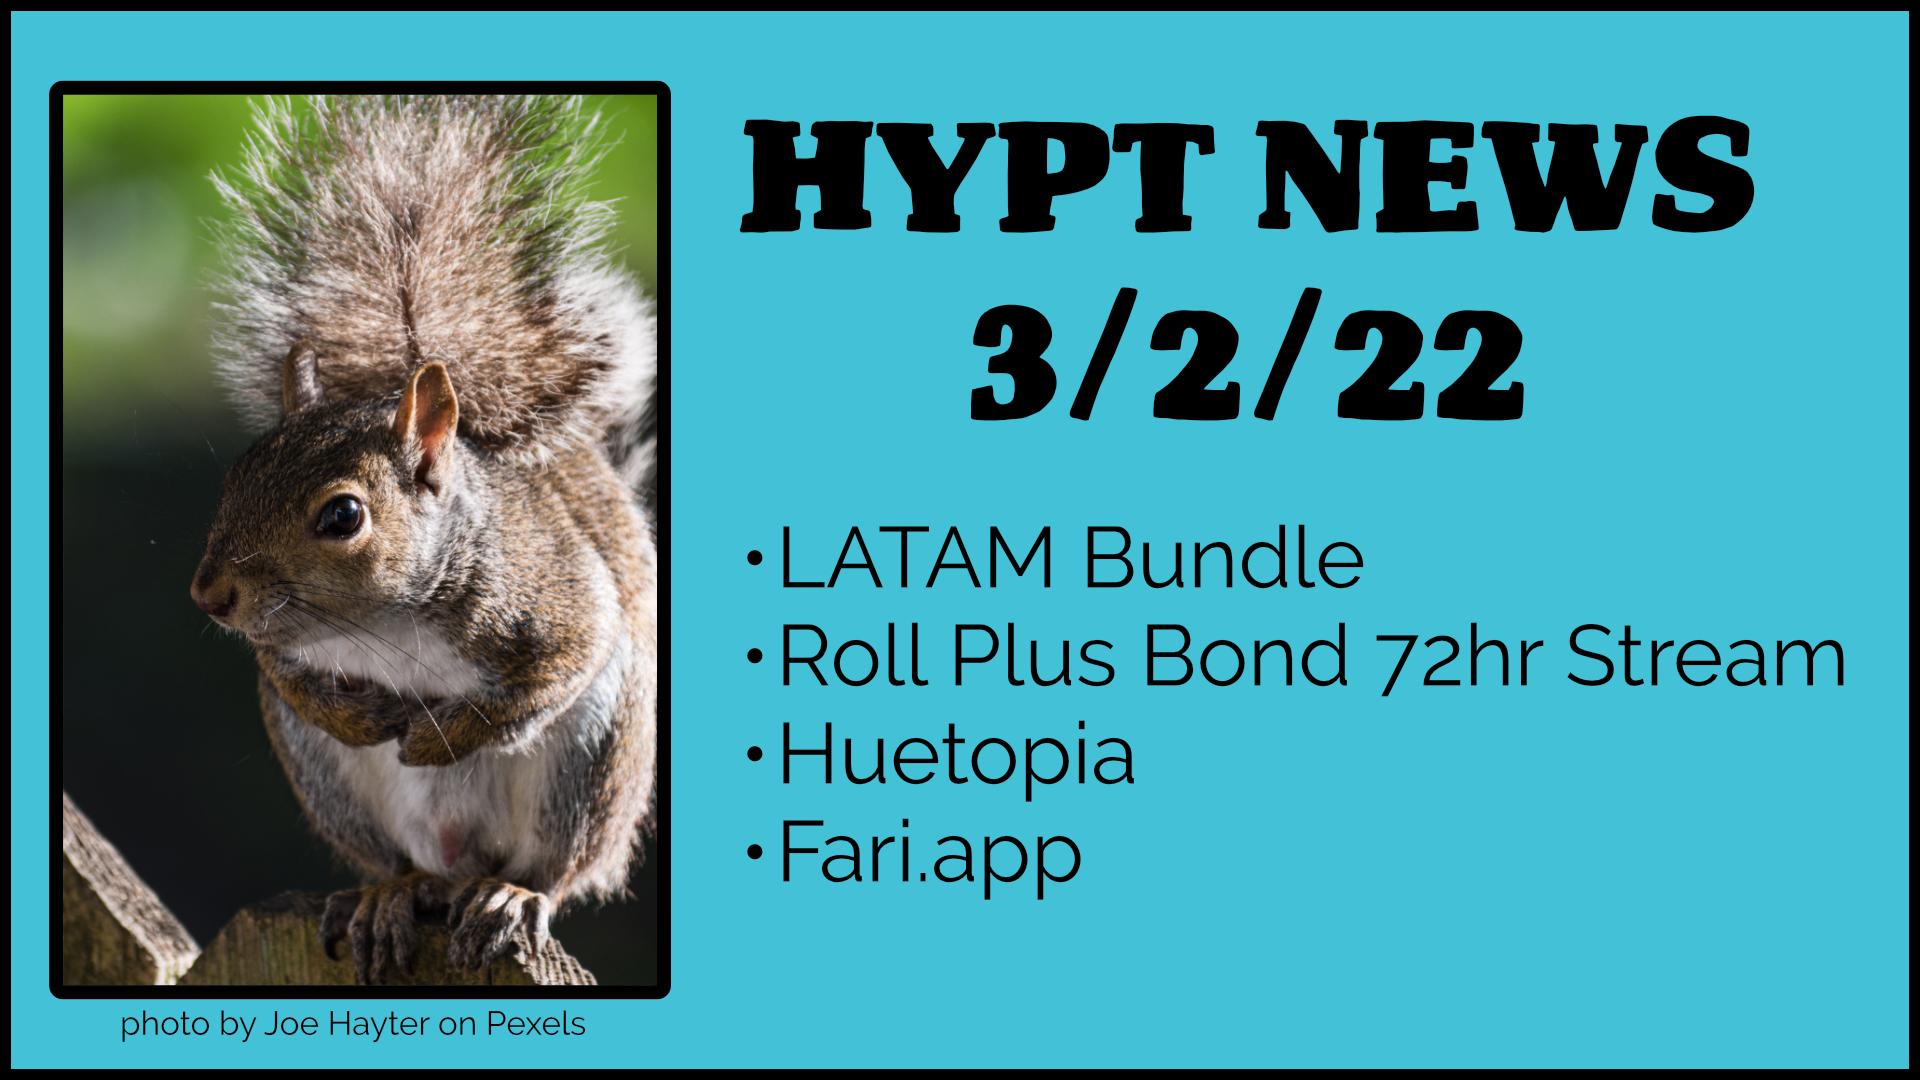 Cover Image for The HYPT Weekly News 3/2/22